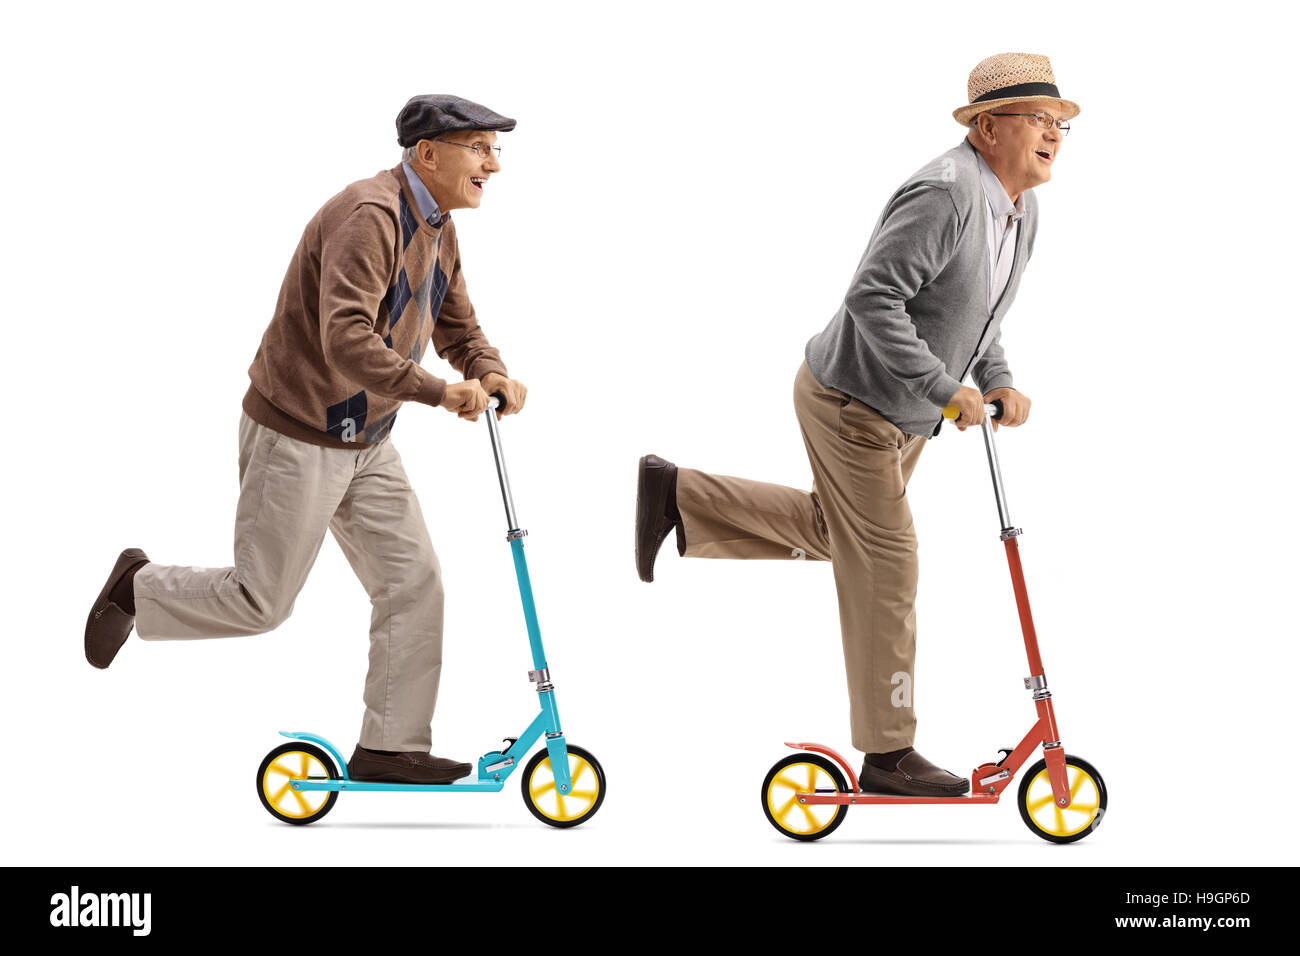 Men on scooters Cut Out Stock Images & Pictures - Alamy